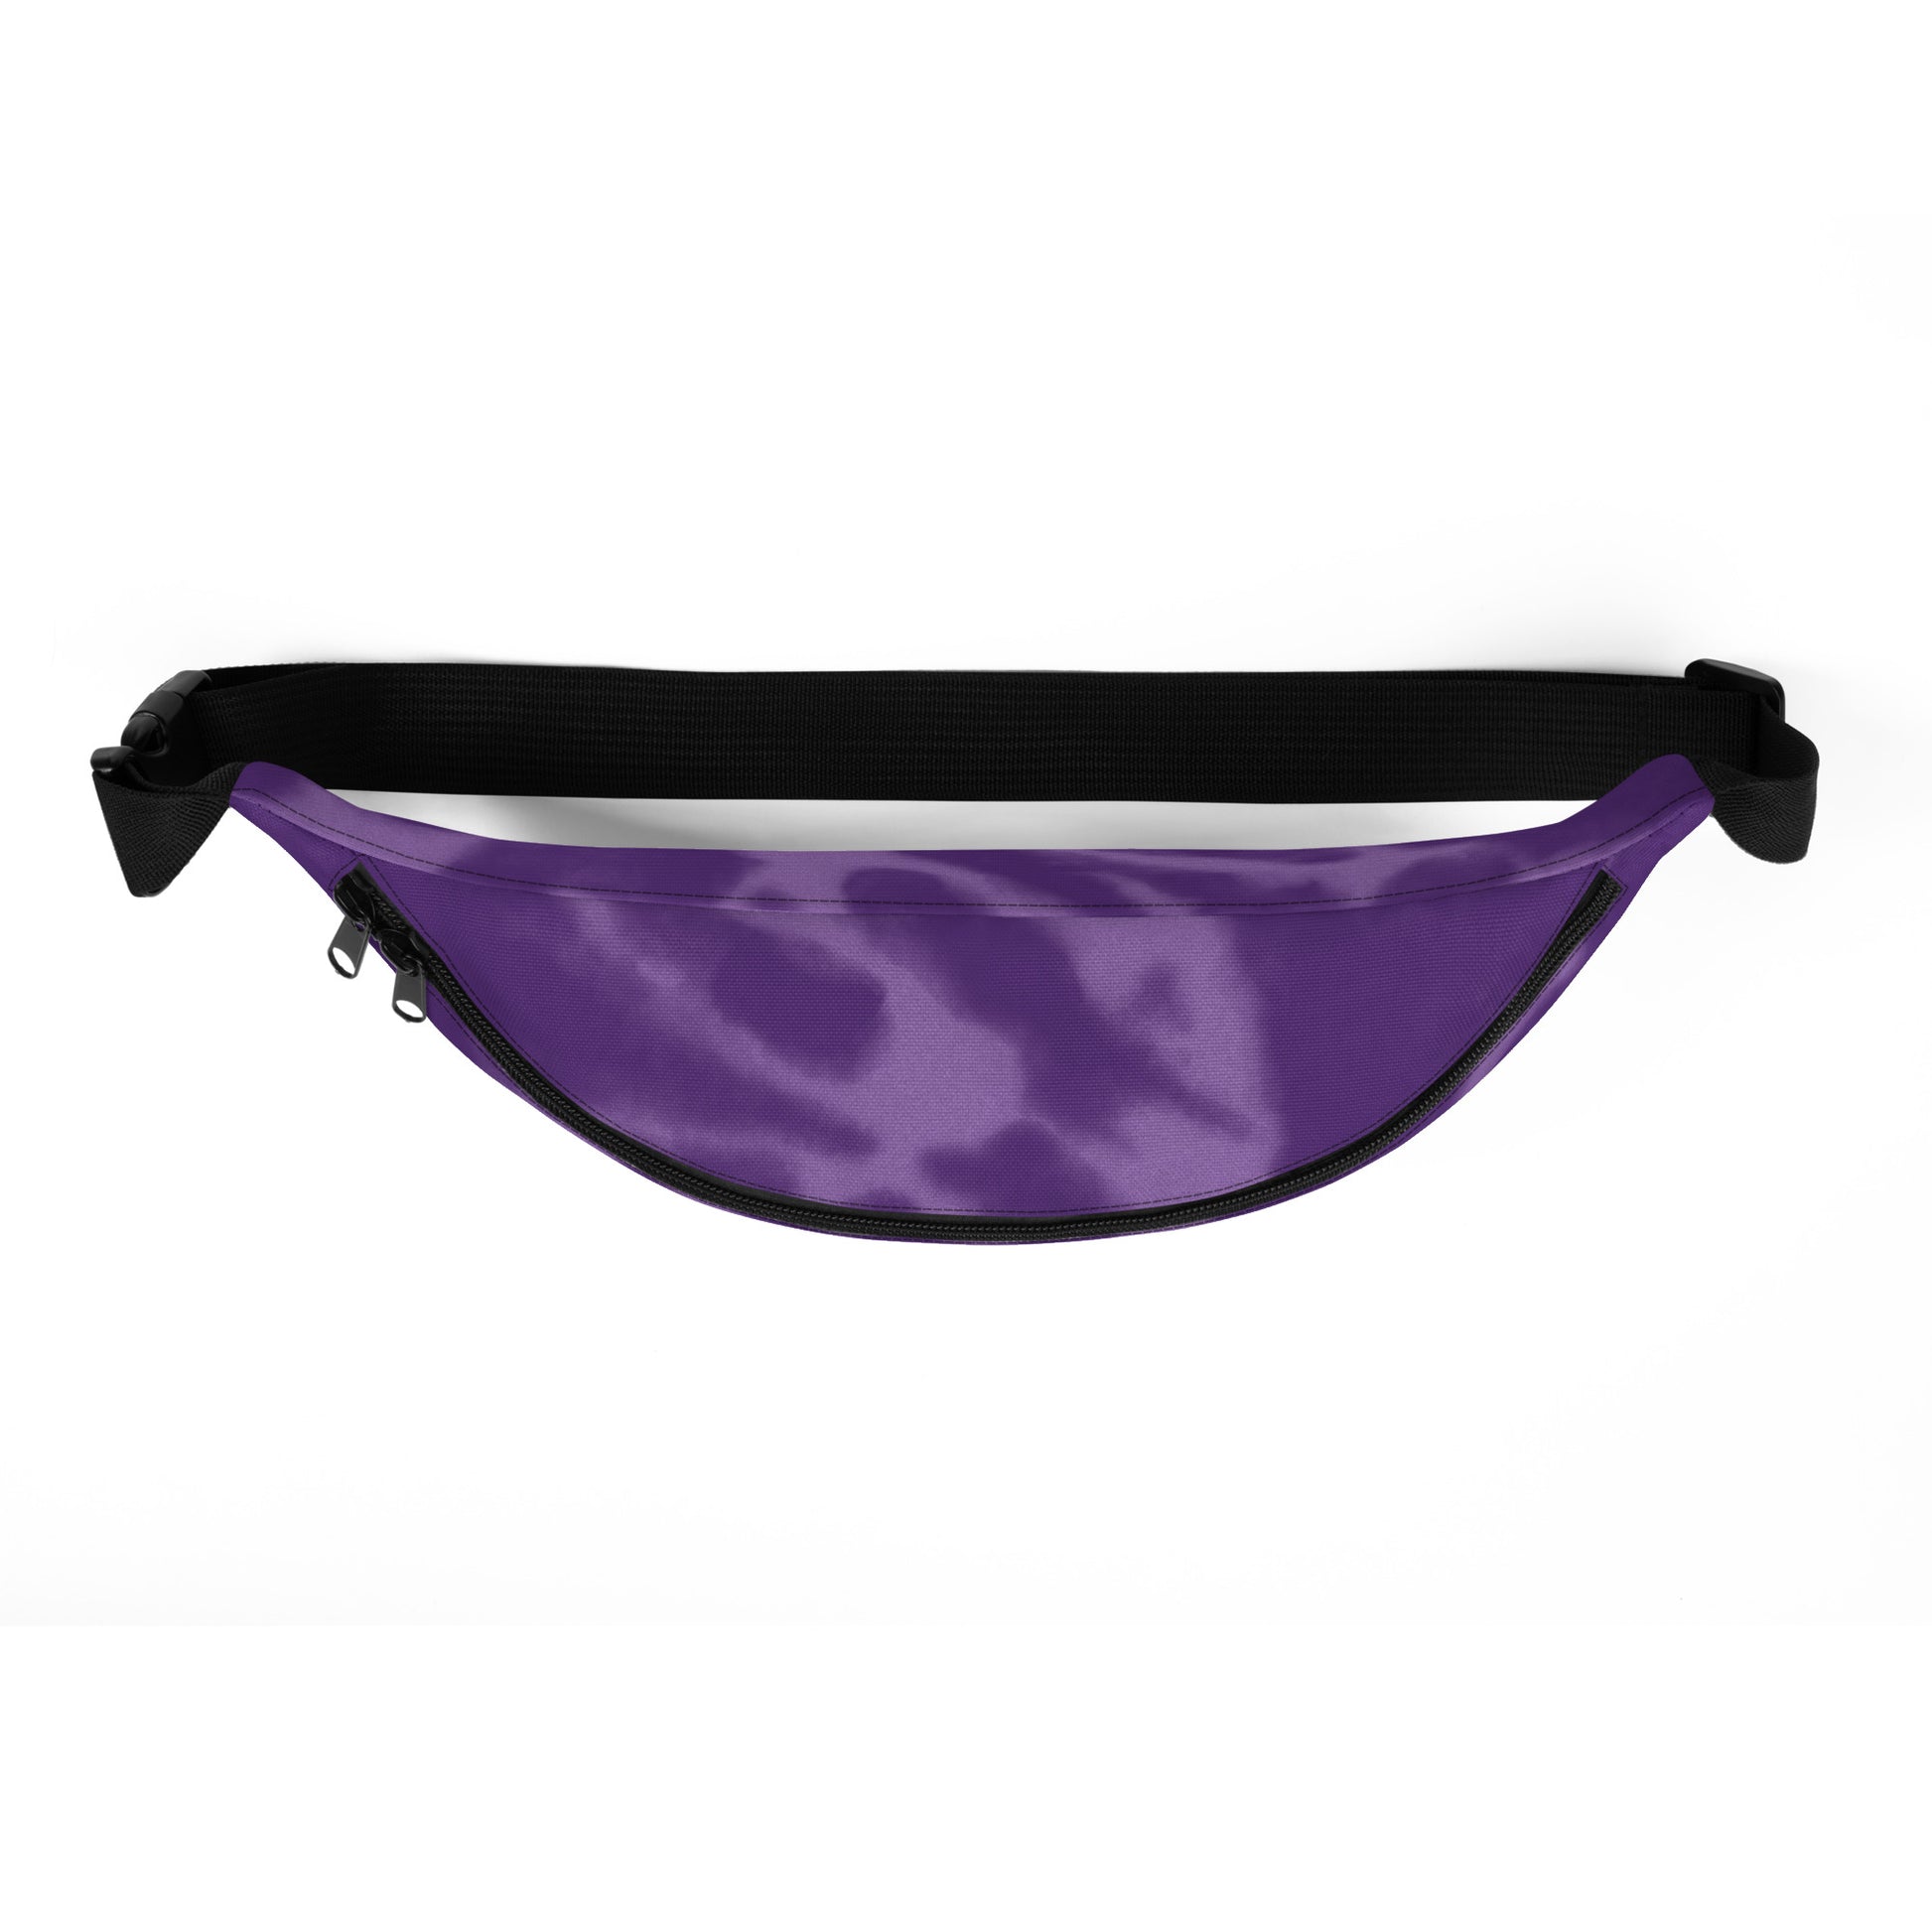 Travel Gift Fanny Pack - Purple Tie-Dye • FCO Rome • YHM Designs - Image 08